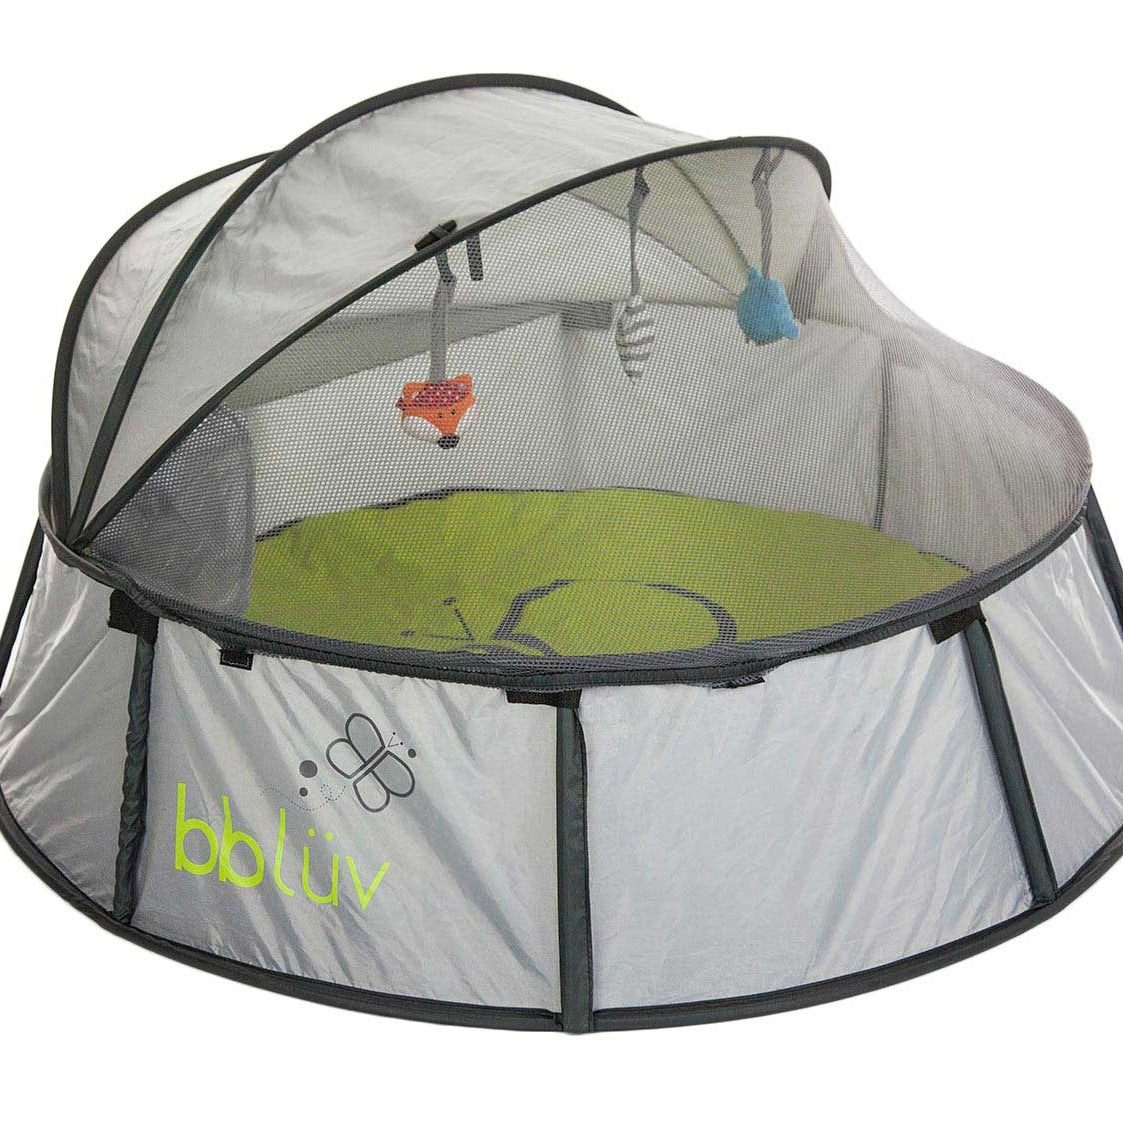 Nido 2-in-1 Travel Bed & Play Tent uniq